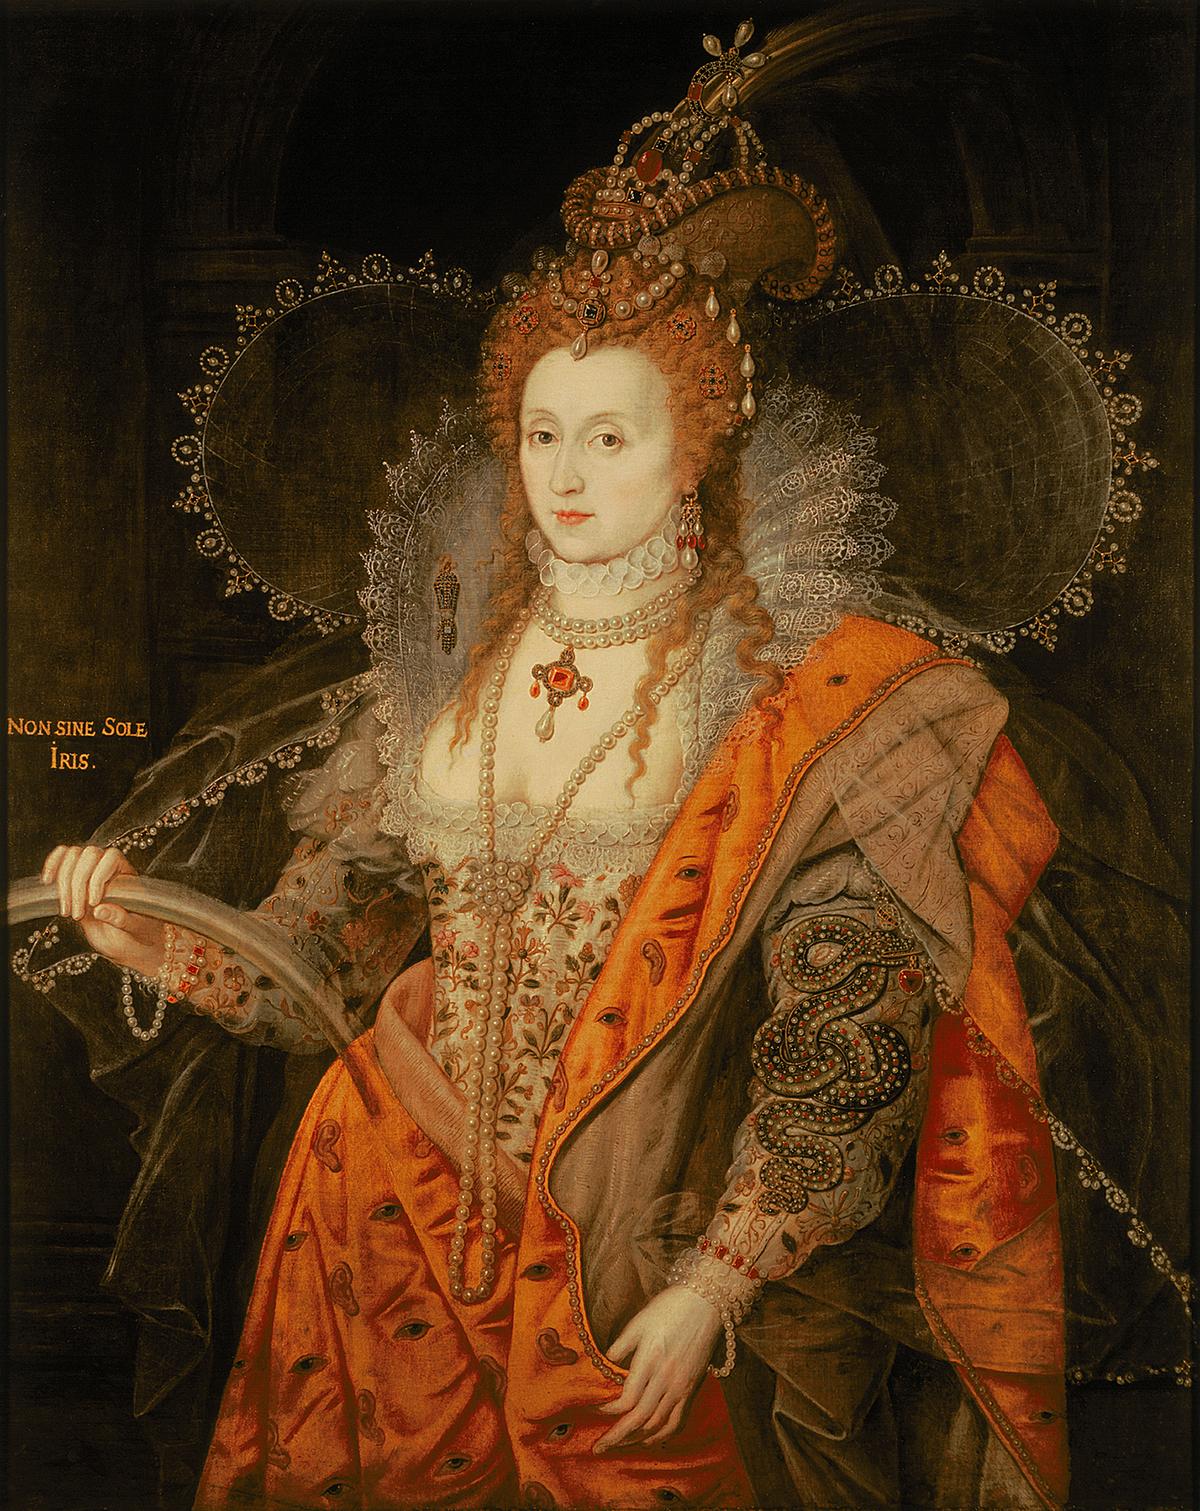 “Elizabeth I (The Rainbow Portrait),” circa 1602, attributed to Marcus Gheeraerts the Younger. Oil on canvas, 50 3/8 inches by 40 inches. Marquess of Salisbury, Hatfield House, Hertfordshire. (Courtesy of Cleveland Museum of Art)